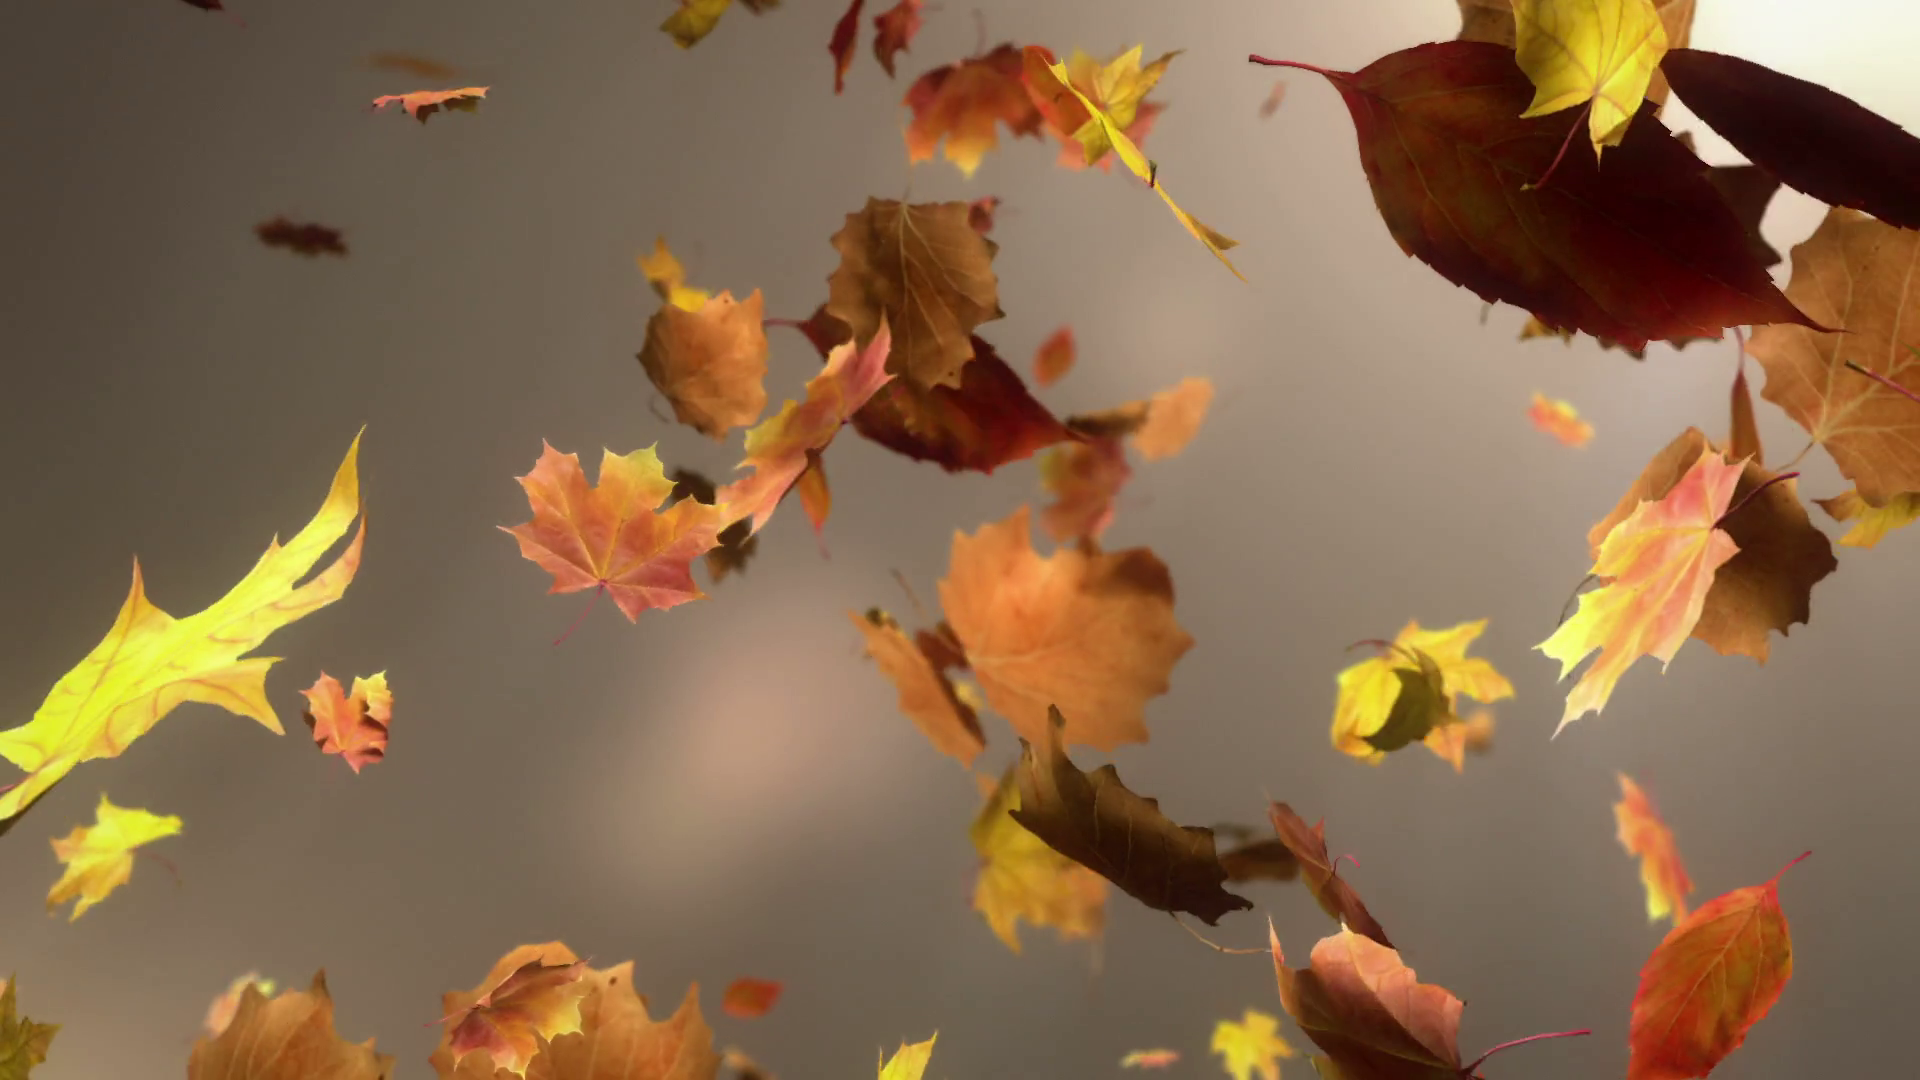 Falling Leaf Loopable Background. igh quality animated background of ...